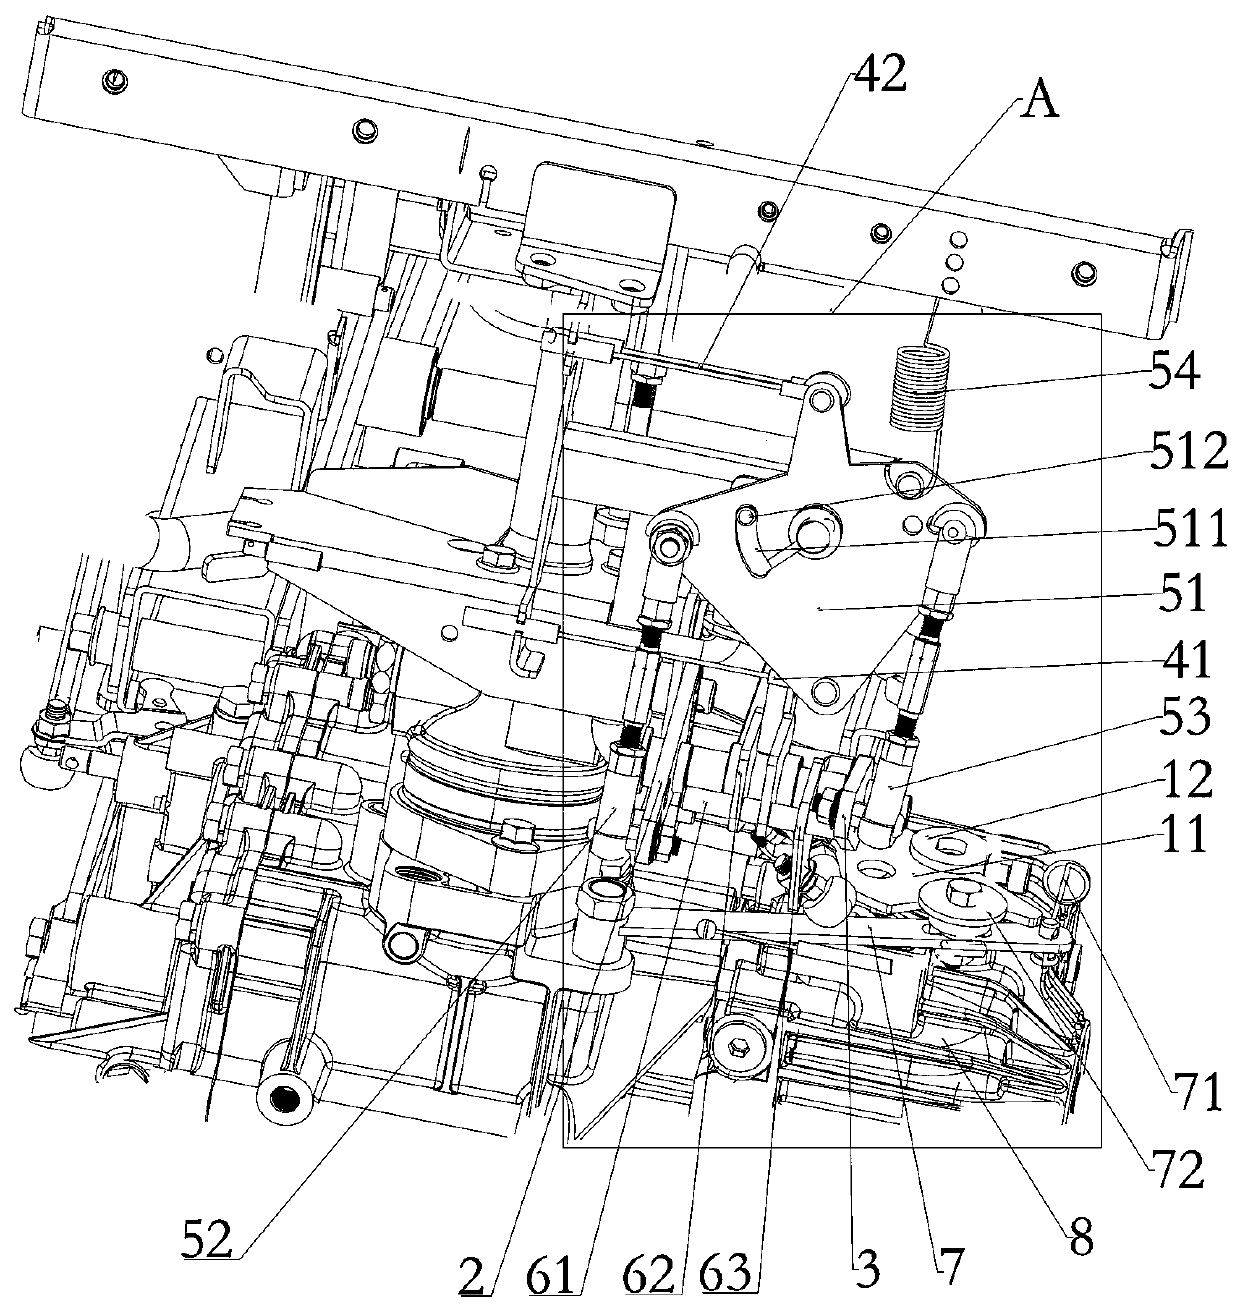 A hst control mechanism and agricultural machinery